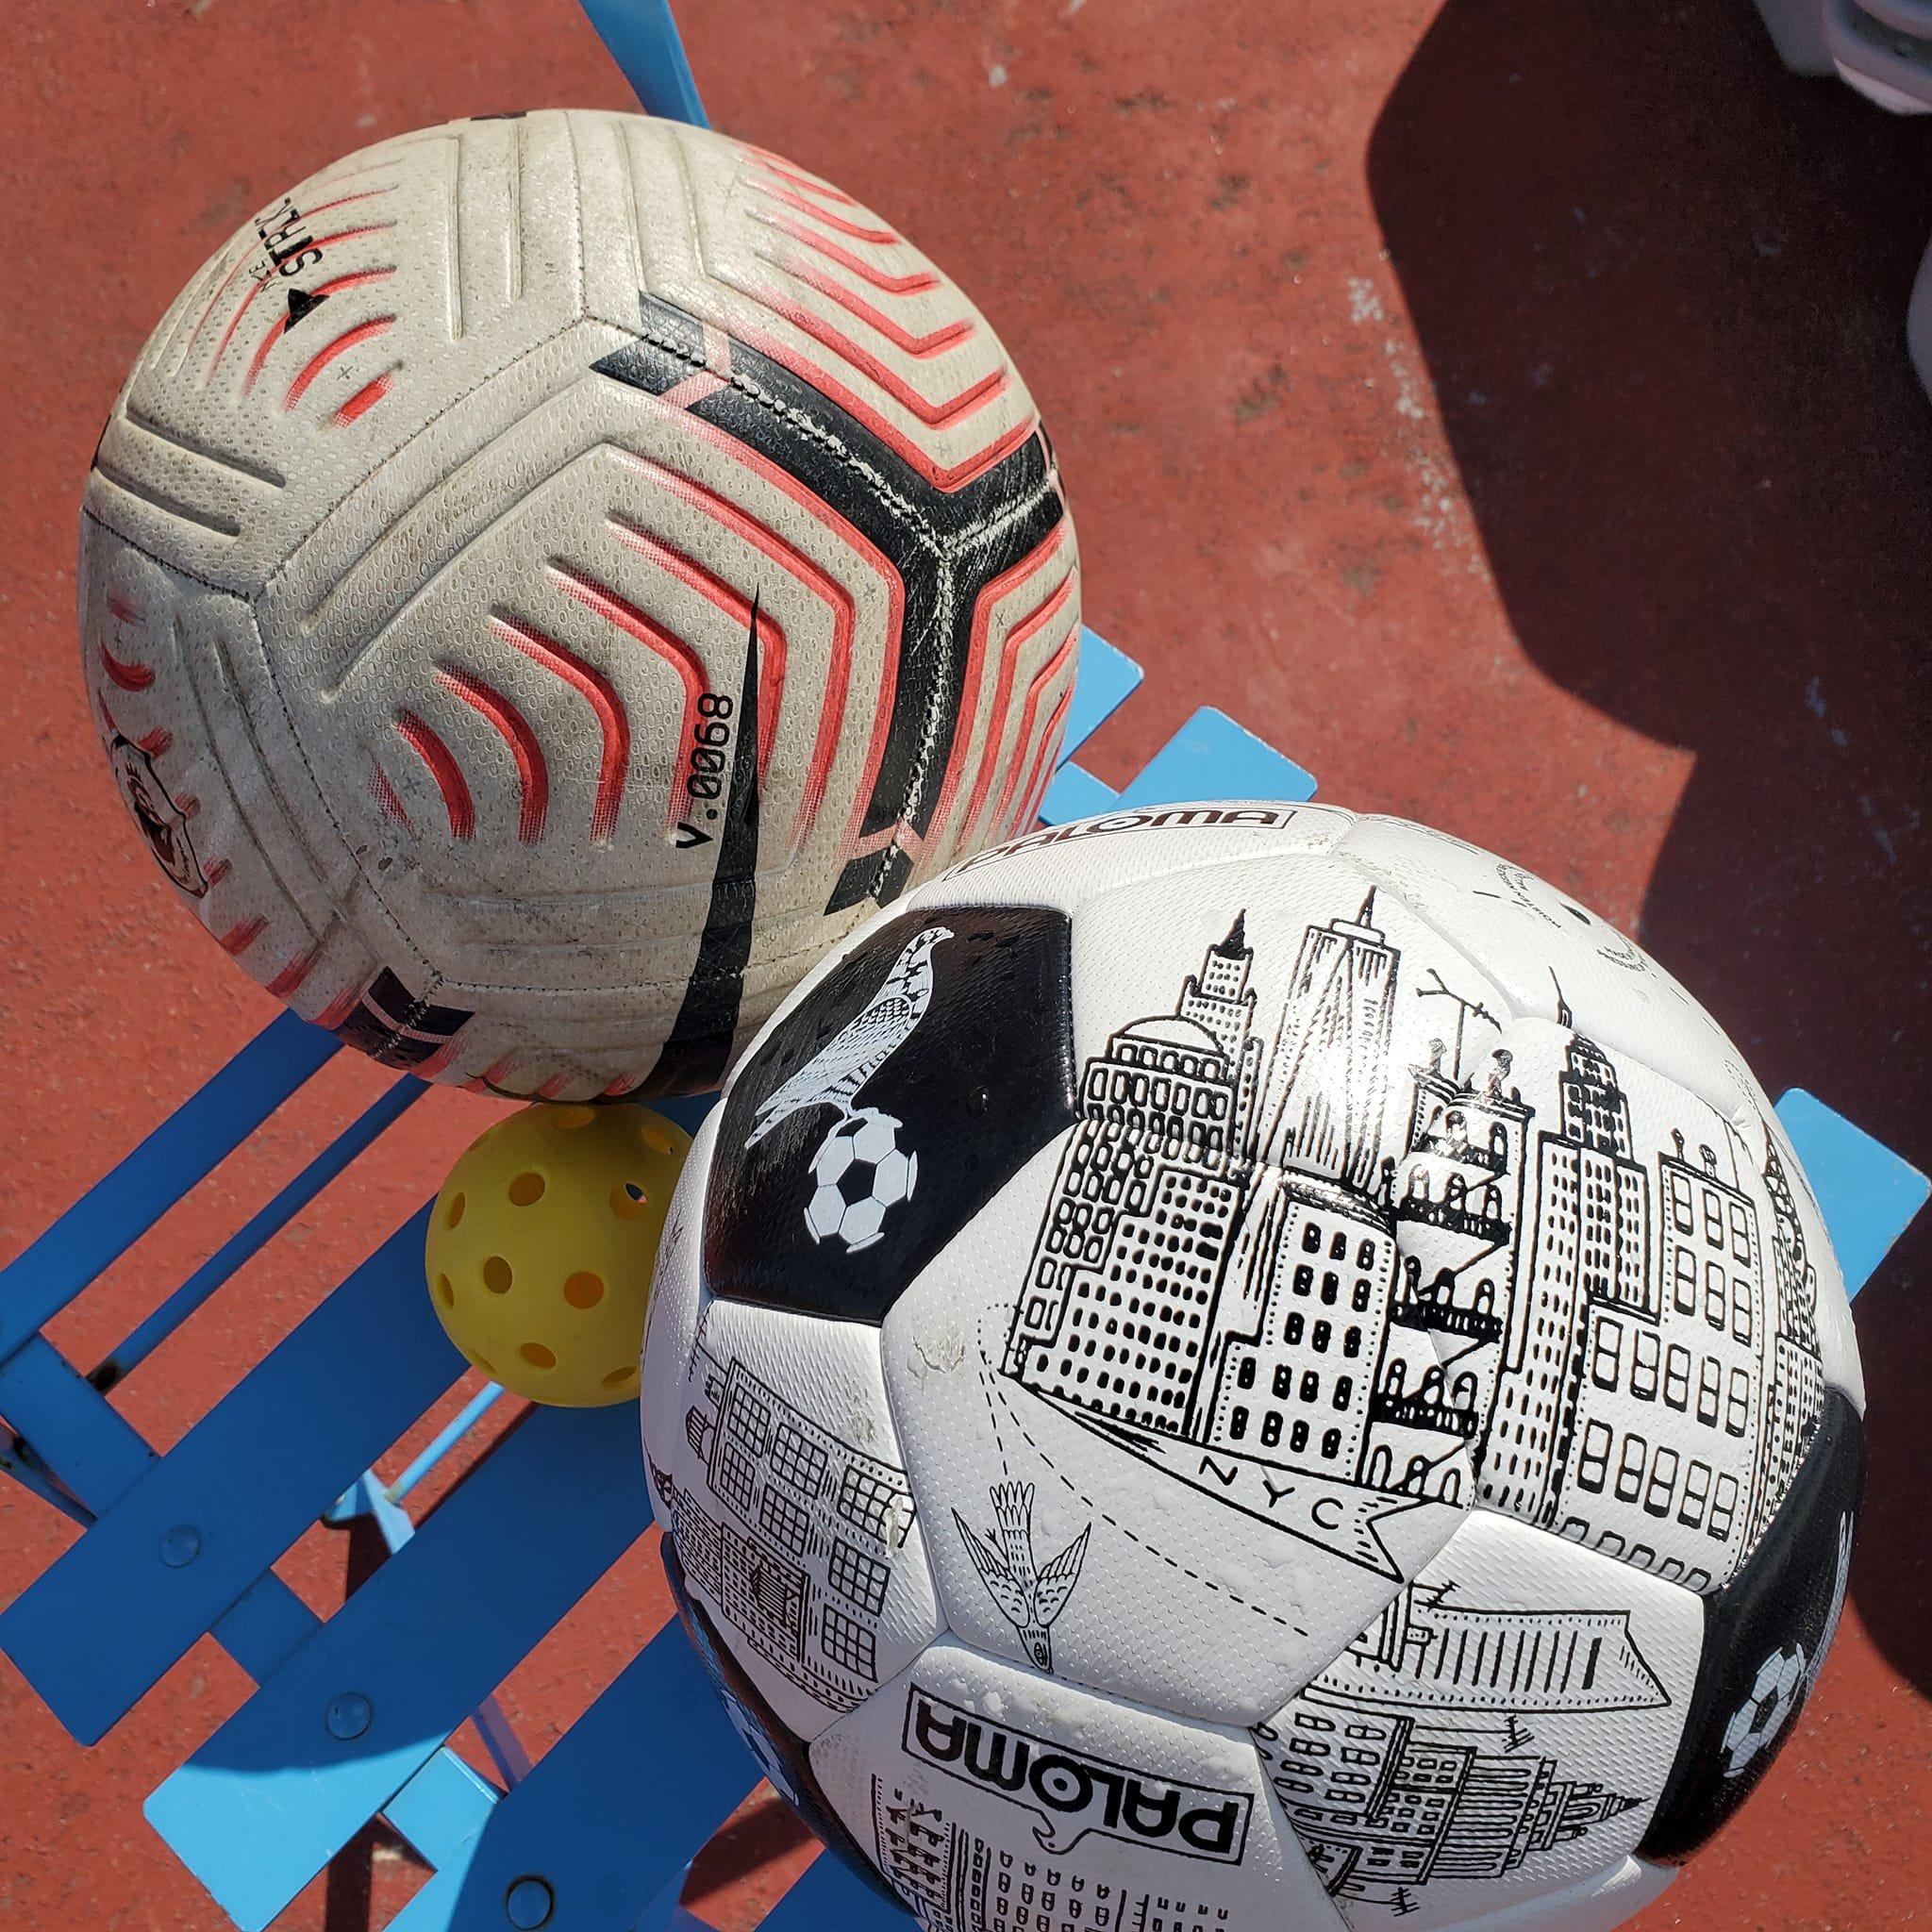 Harbor balls! Free! On deck of the #MaryWhalen during #TankerTime.

The Paloma BW soccer ball looks inspired by Duke Riley. Duke, did you design a soccer ball?

#RedHook #Brooklyn #NYC